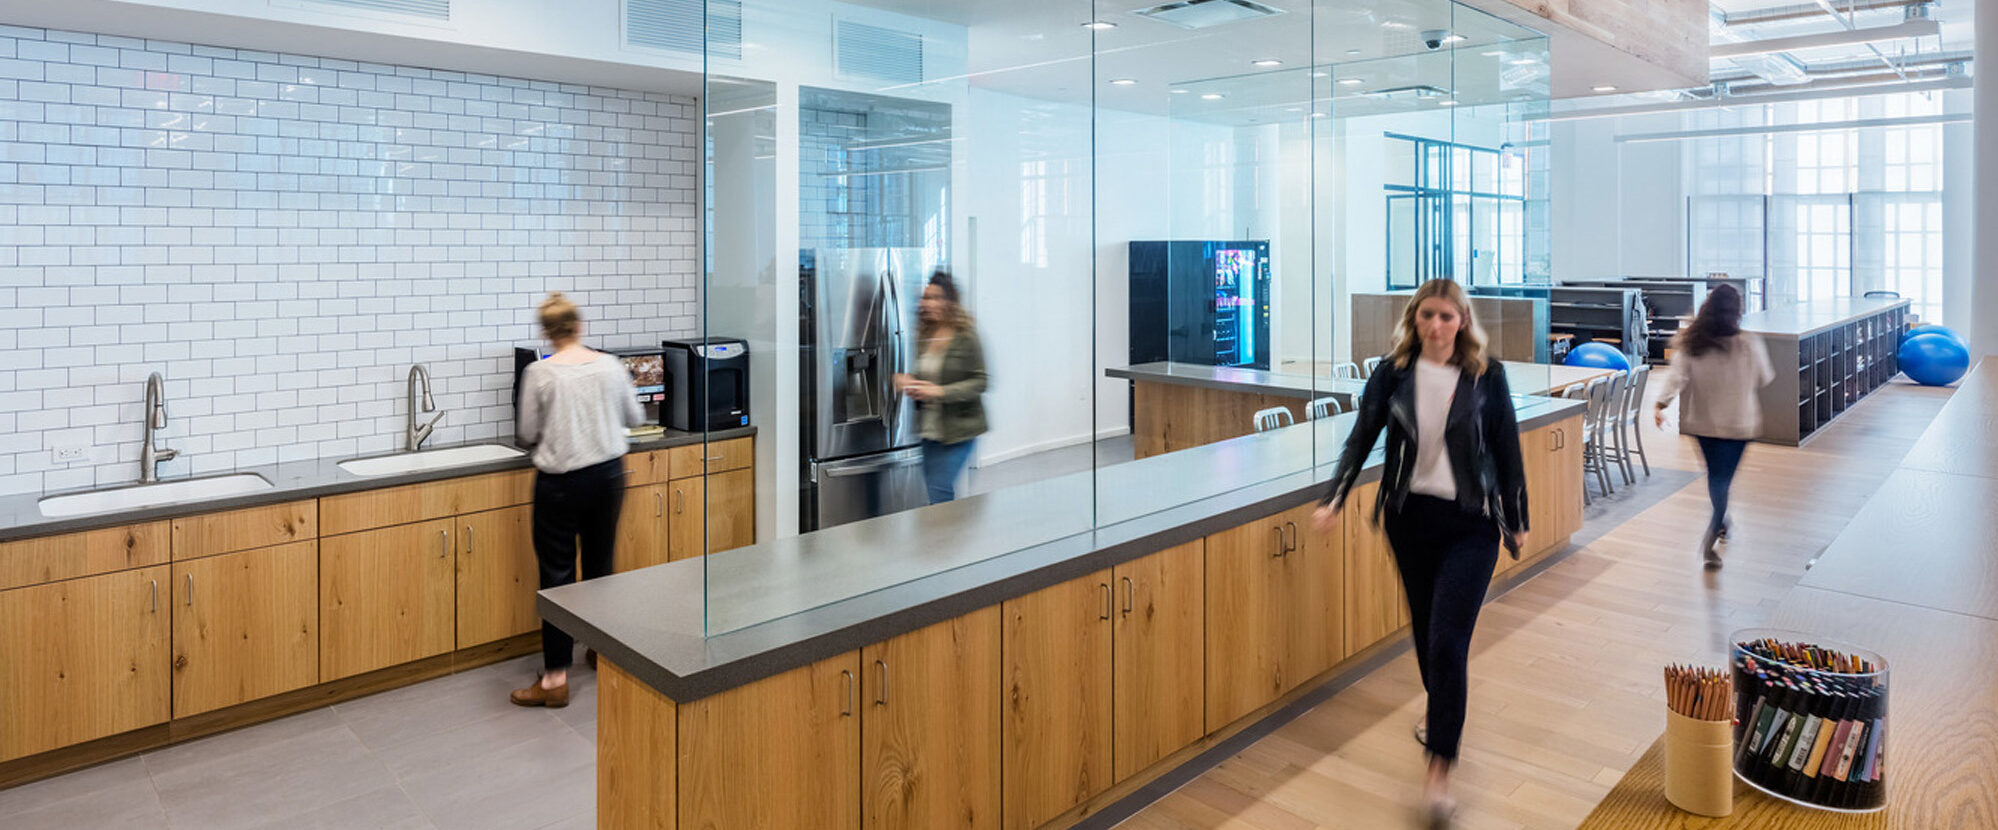 Modern office kitchenette with glass partitions, featuring wood grain lower cabinets against white subway tiles. Exposed wooden beams add warmth, complementing the polished concrete floor. Openness and natural lighting enhance the space's collaborative atmosphere.